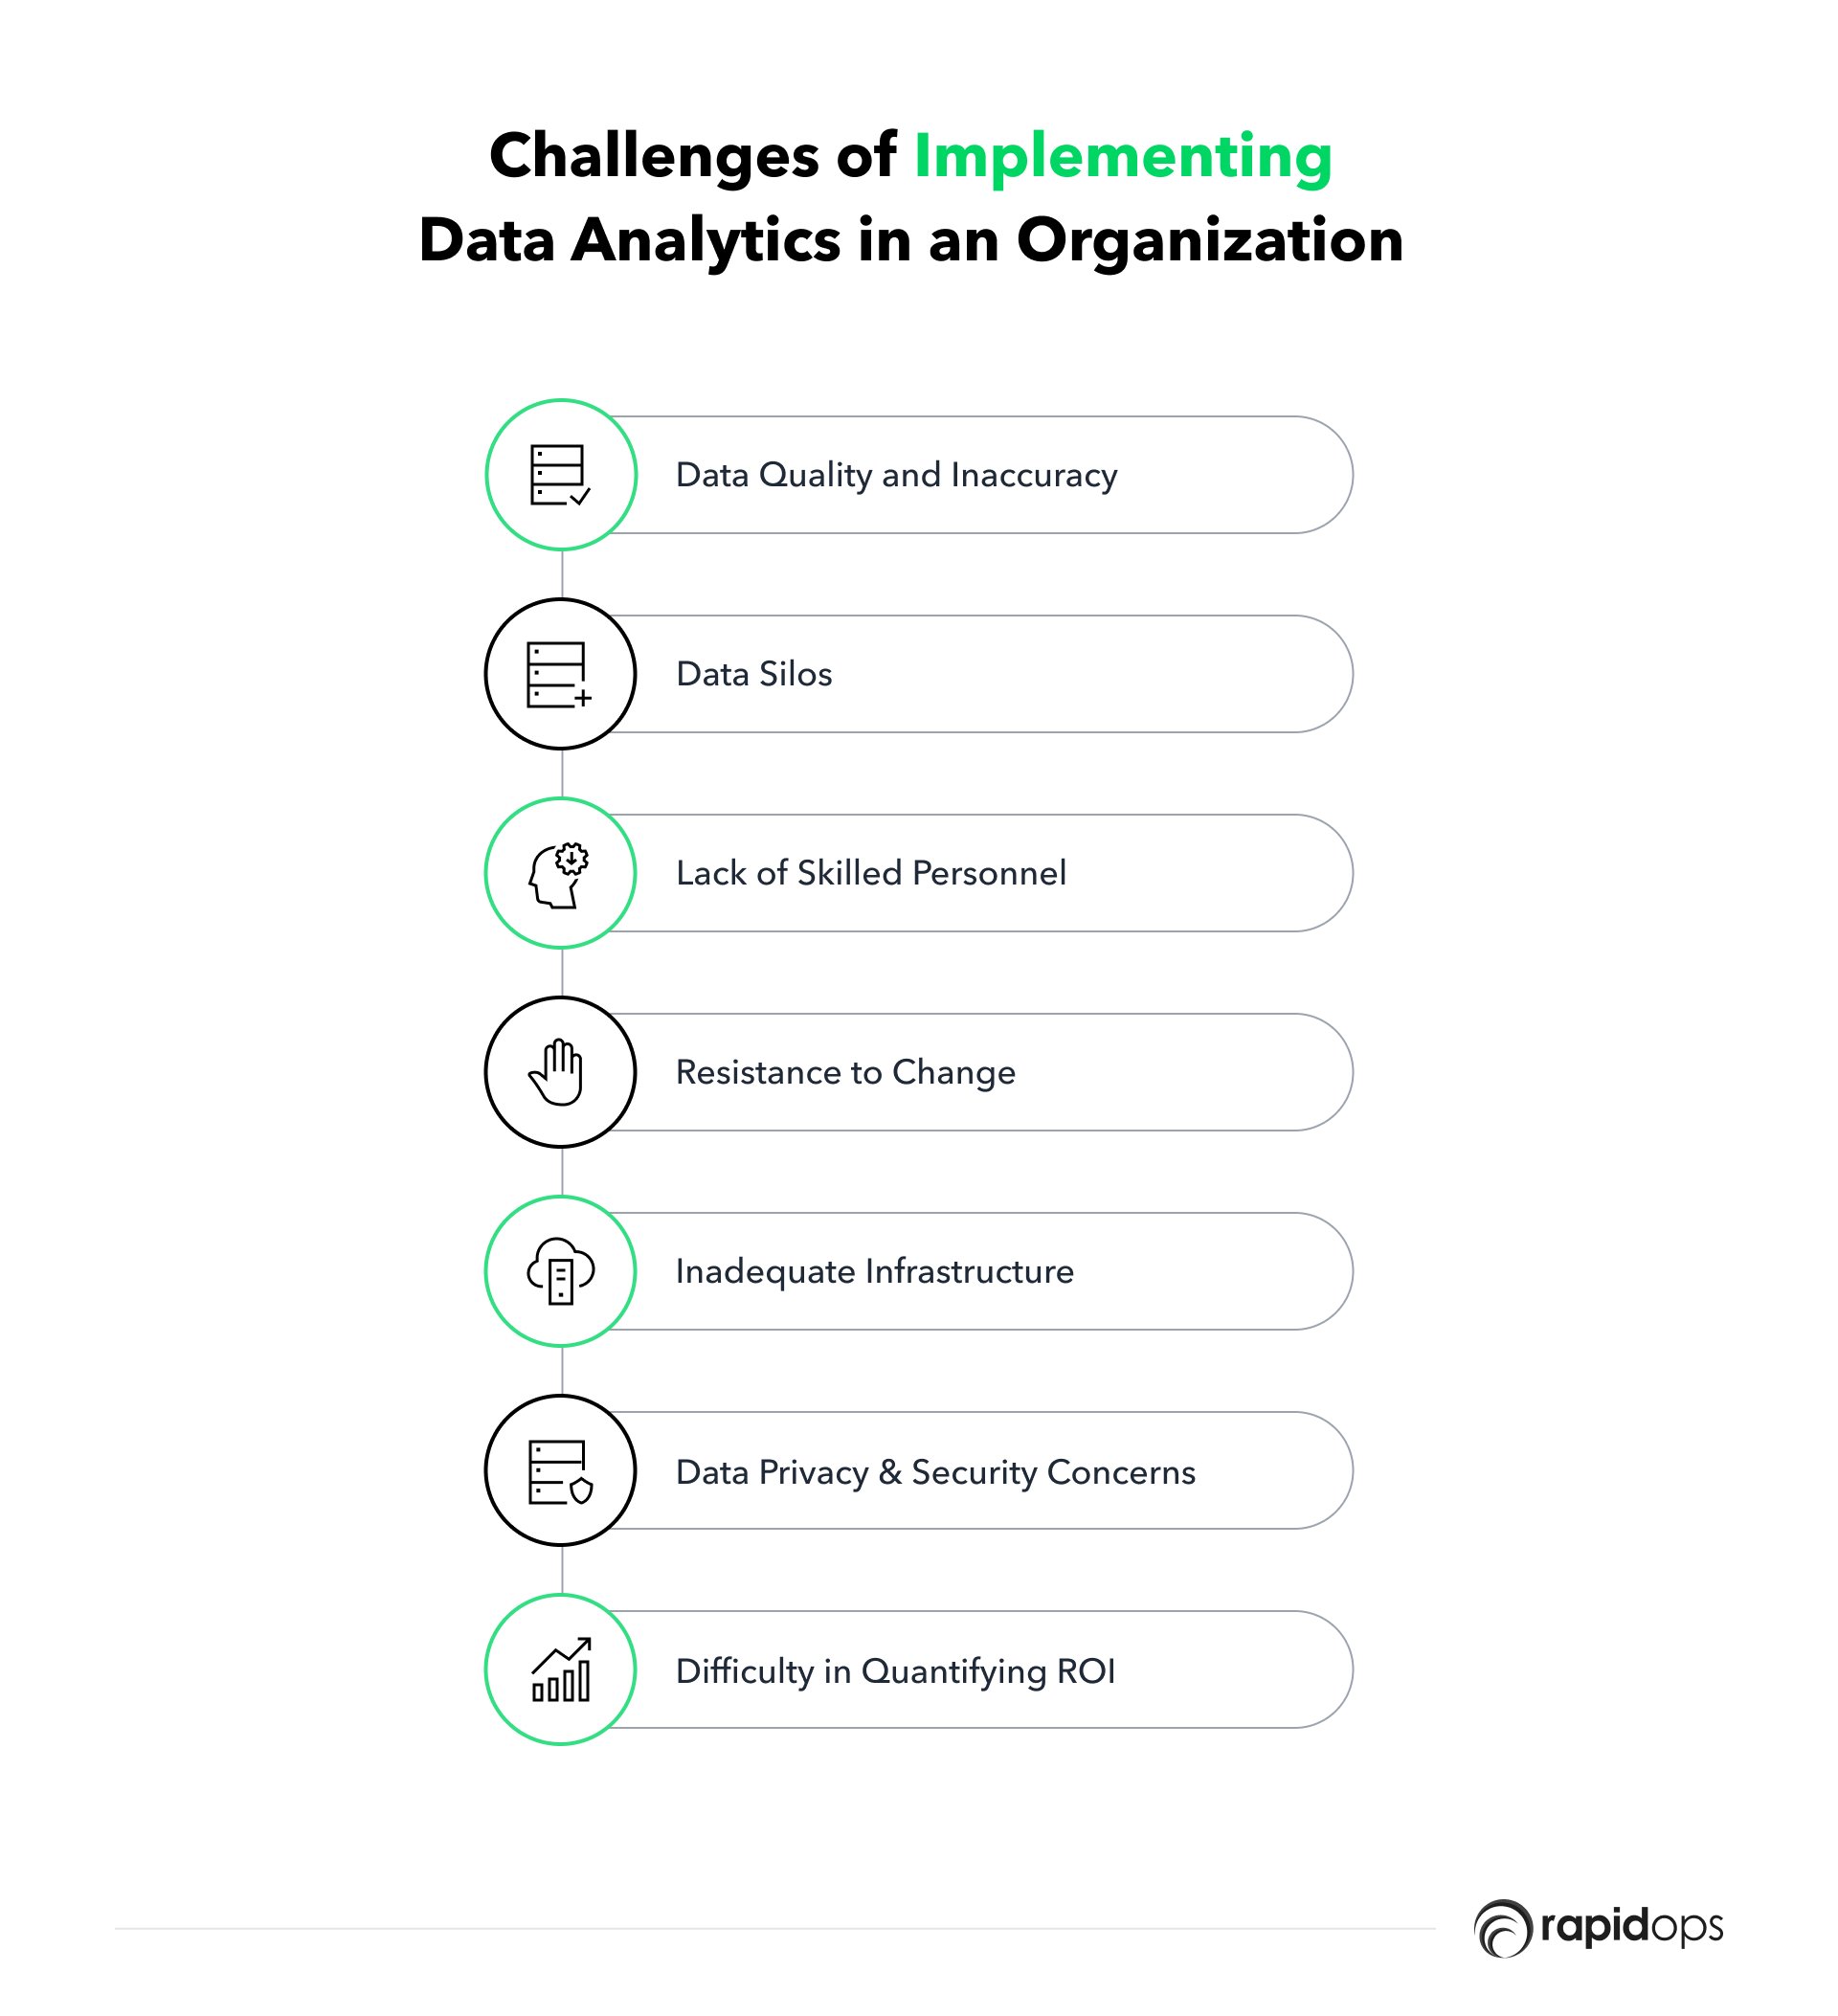 Challenges of implementing data analytics in an organization 